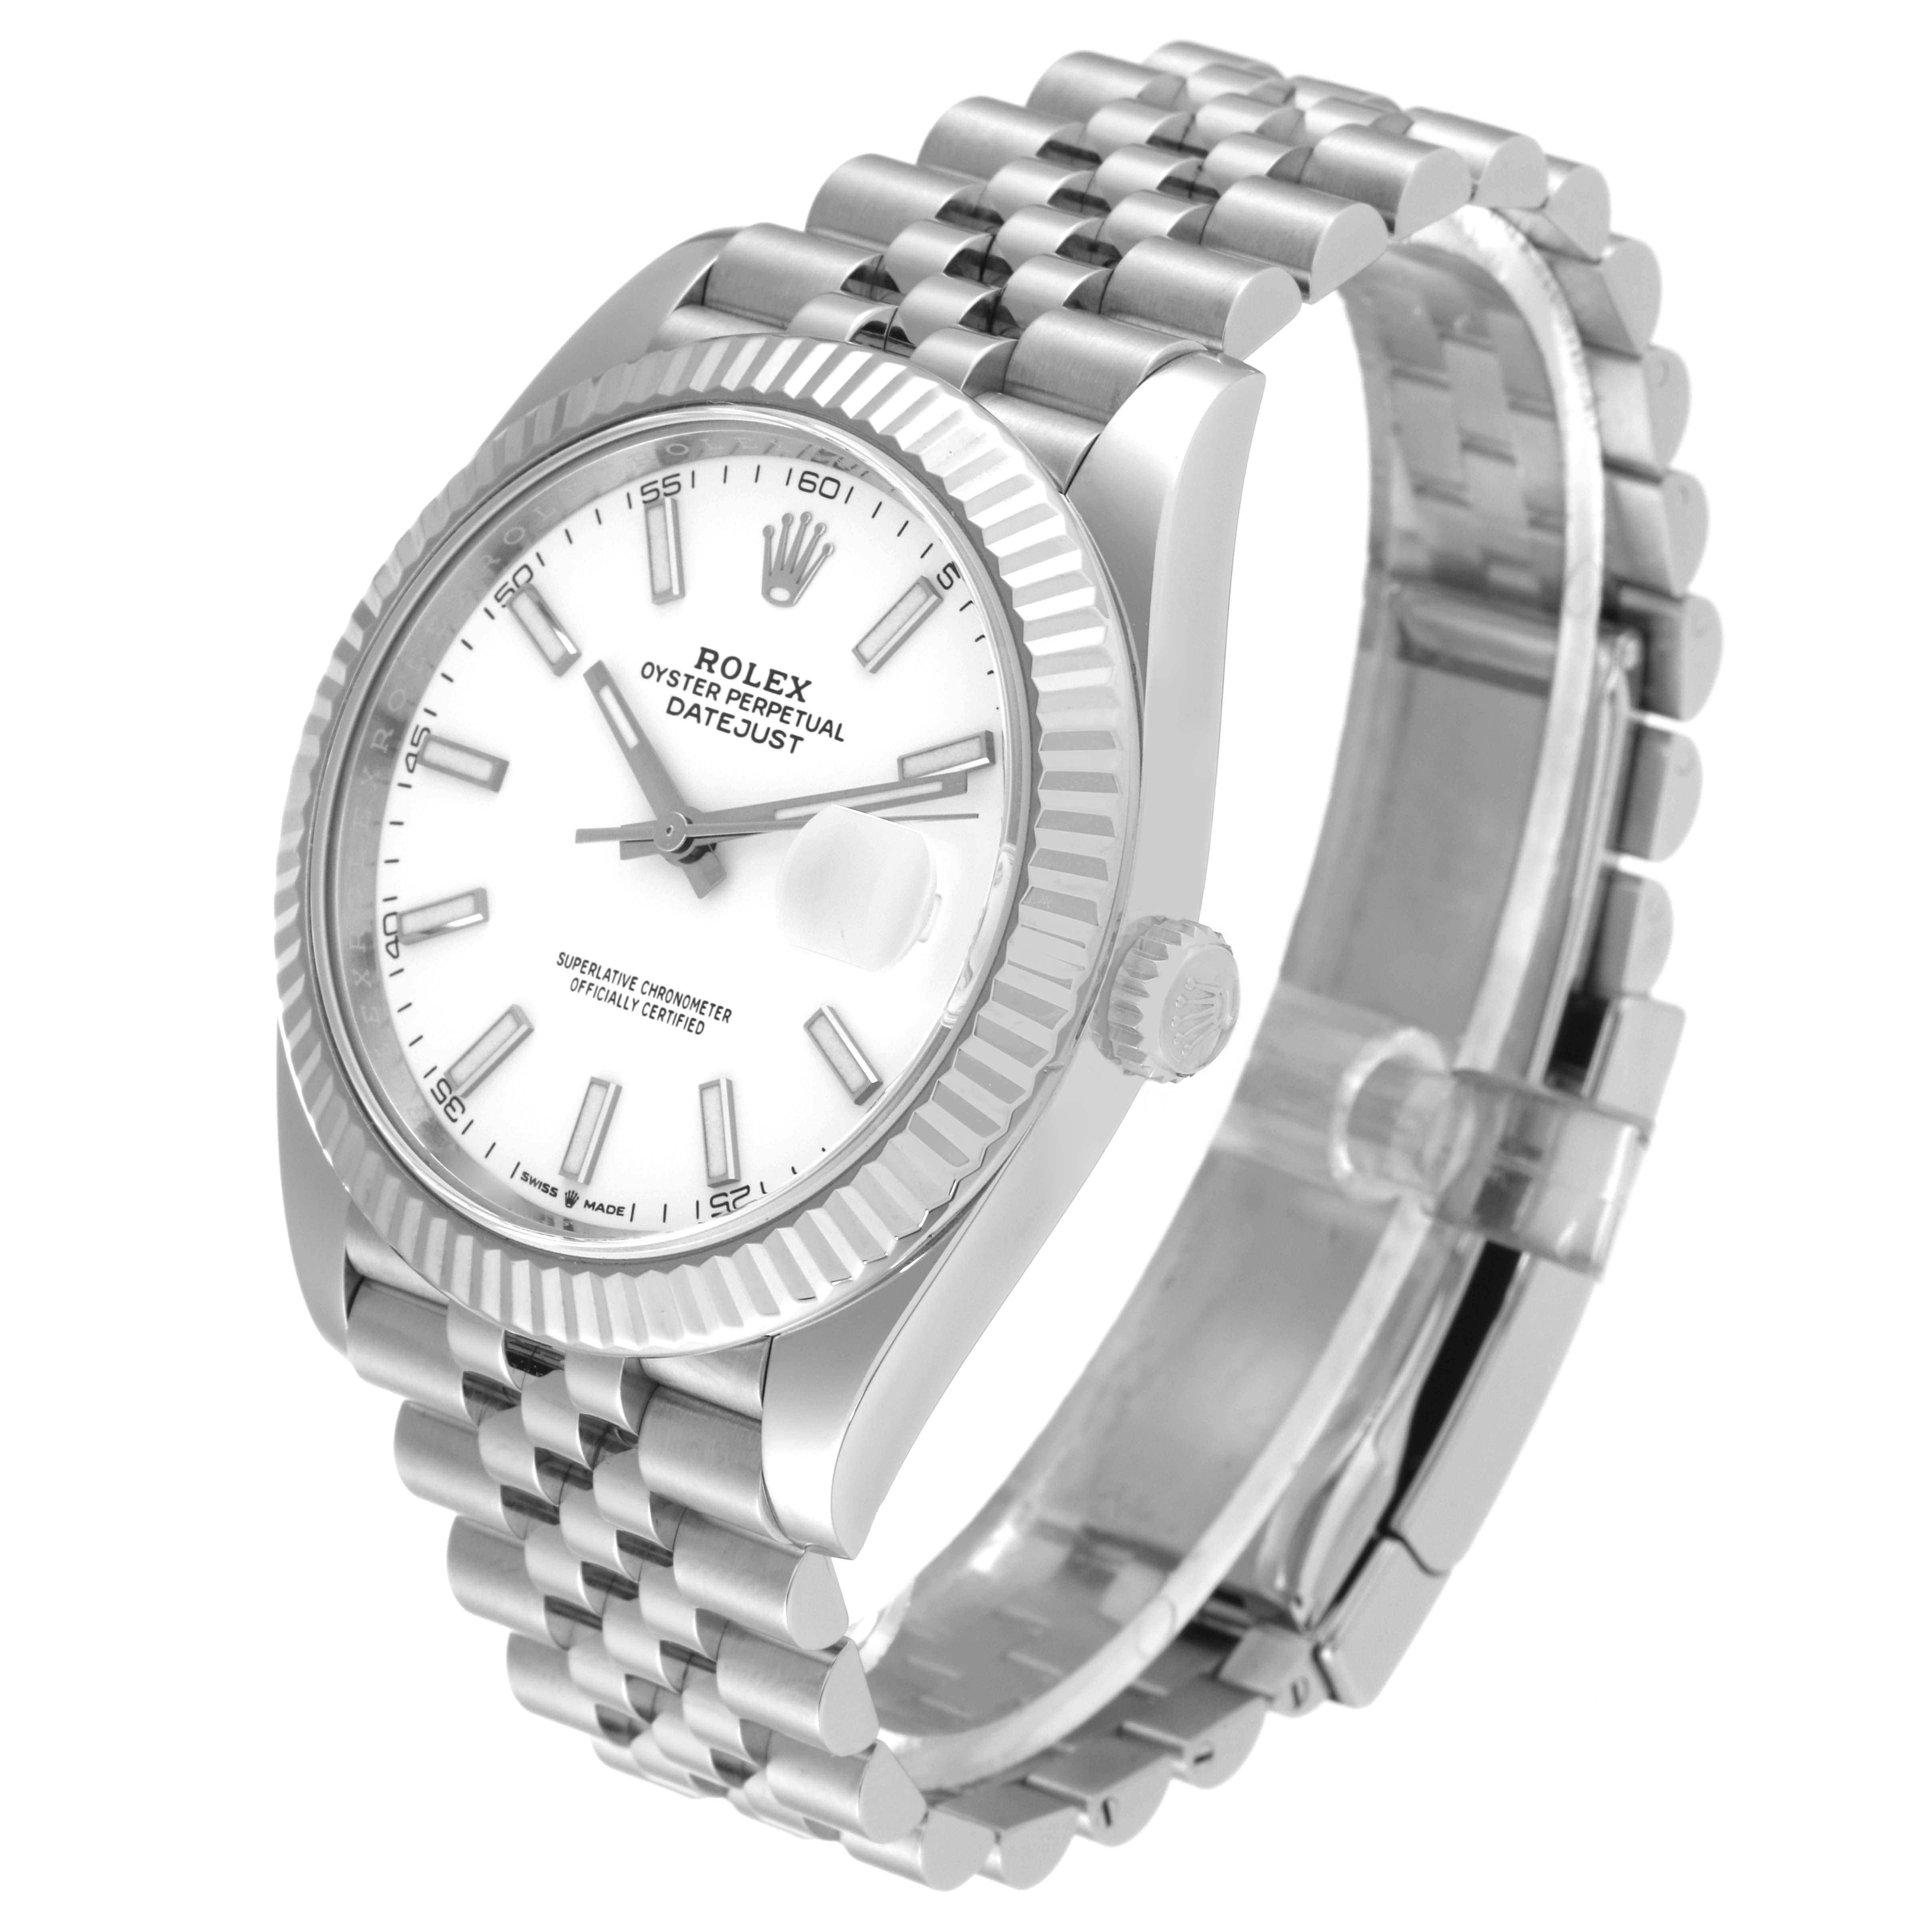 Men's Rolex Datejust 41 White Dial Steel Mens Watch 126334 Box Card For Sale